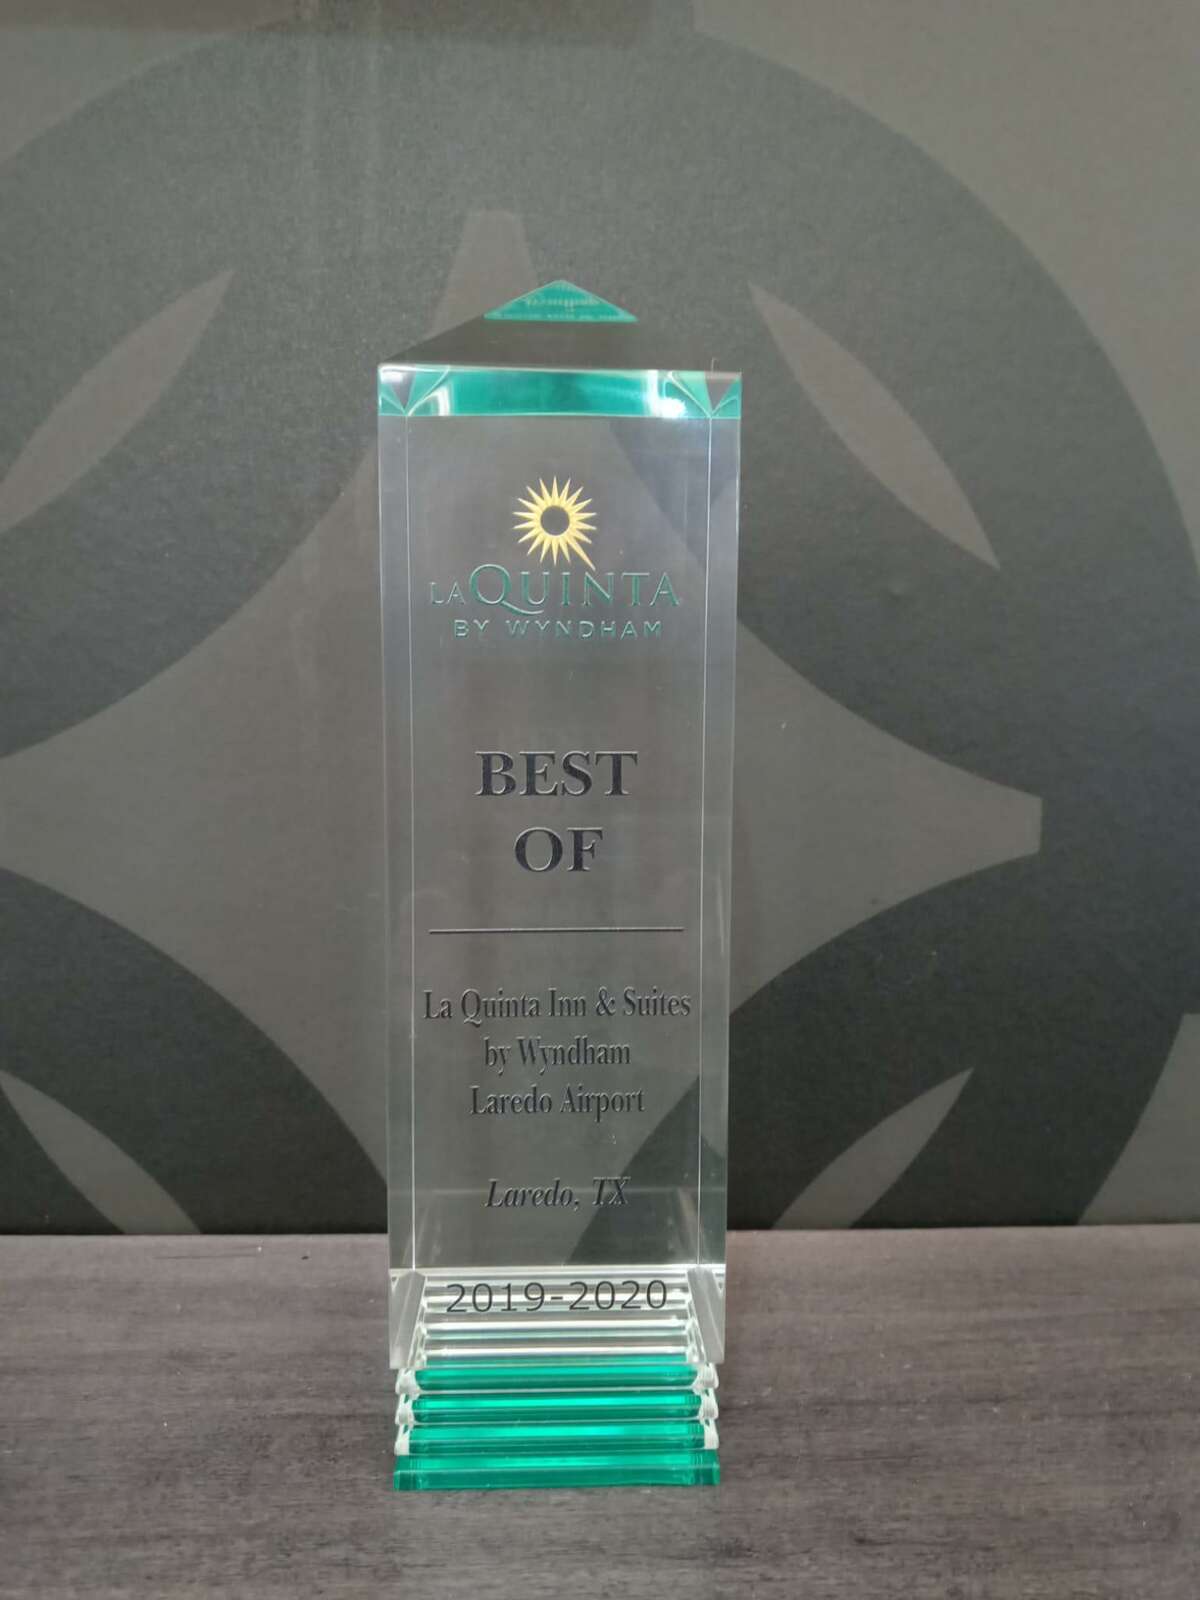 La Quinta Inn & Suites Laredo Airport was awarded “Best of” for 2020 because of its “exceptional level of service, quality, and commitment to excellence.”